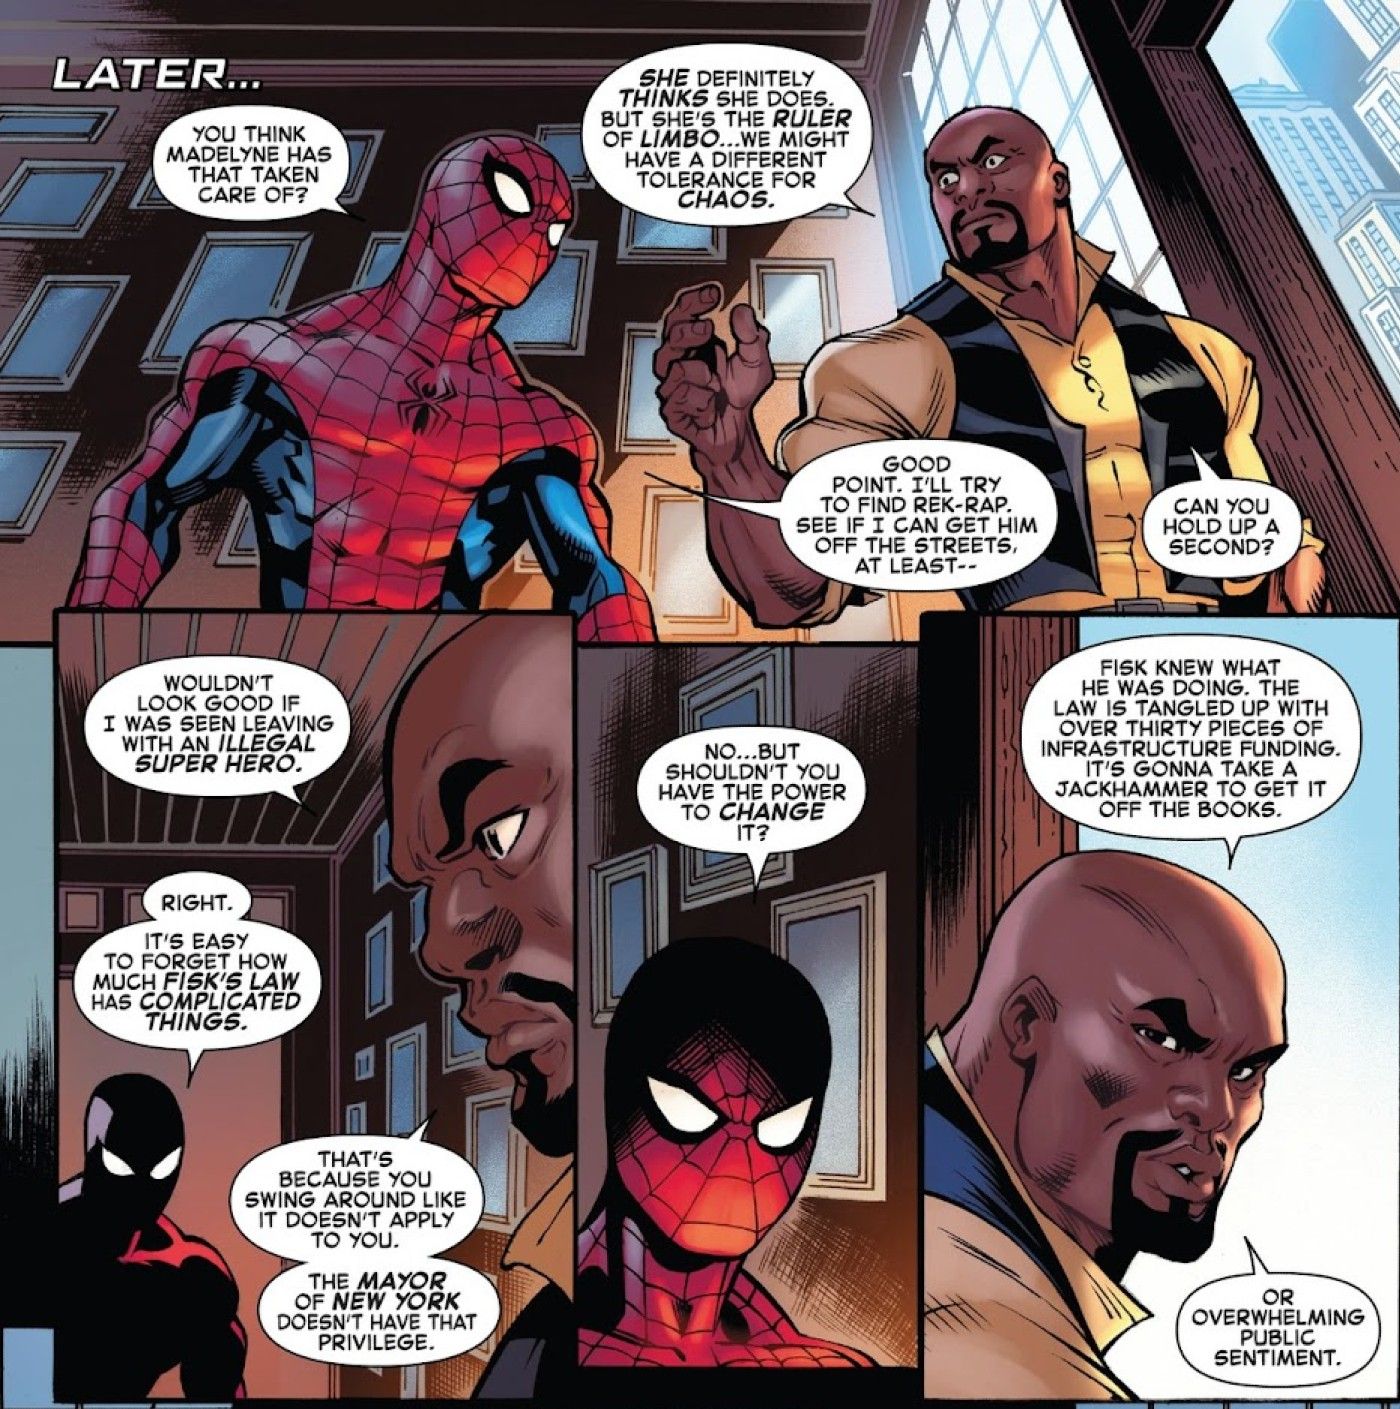 panels from The Amazing Spider-Man #36, Spider-Man talks to Mayor Luke Cage about politics of New York